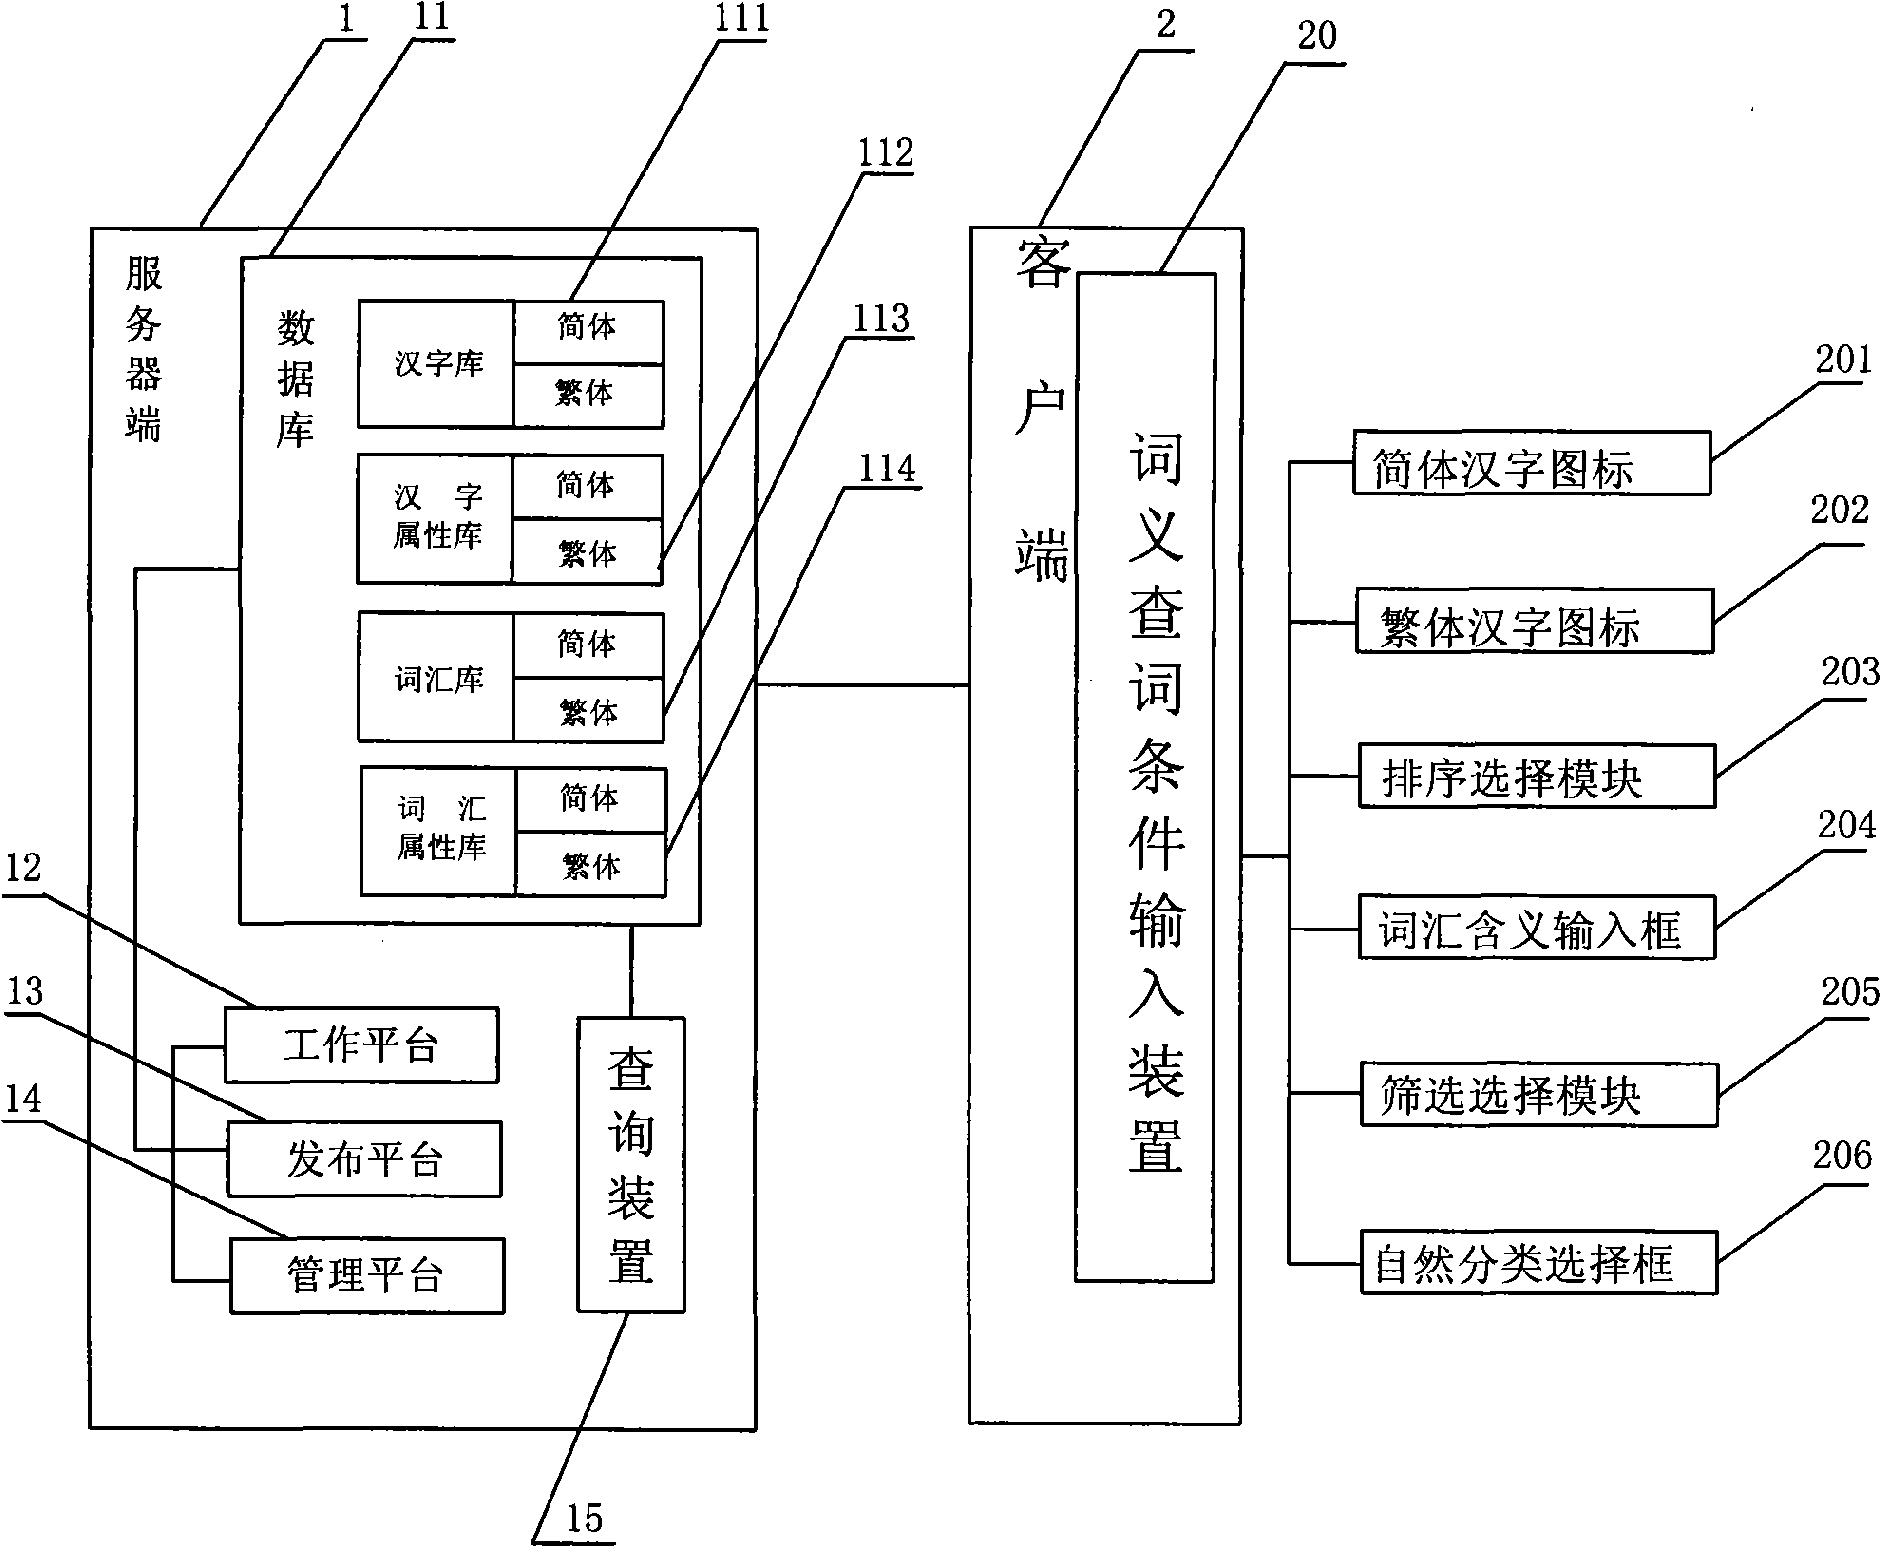 System and method for searching word through word meaning based on computer network